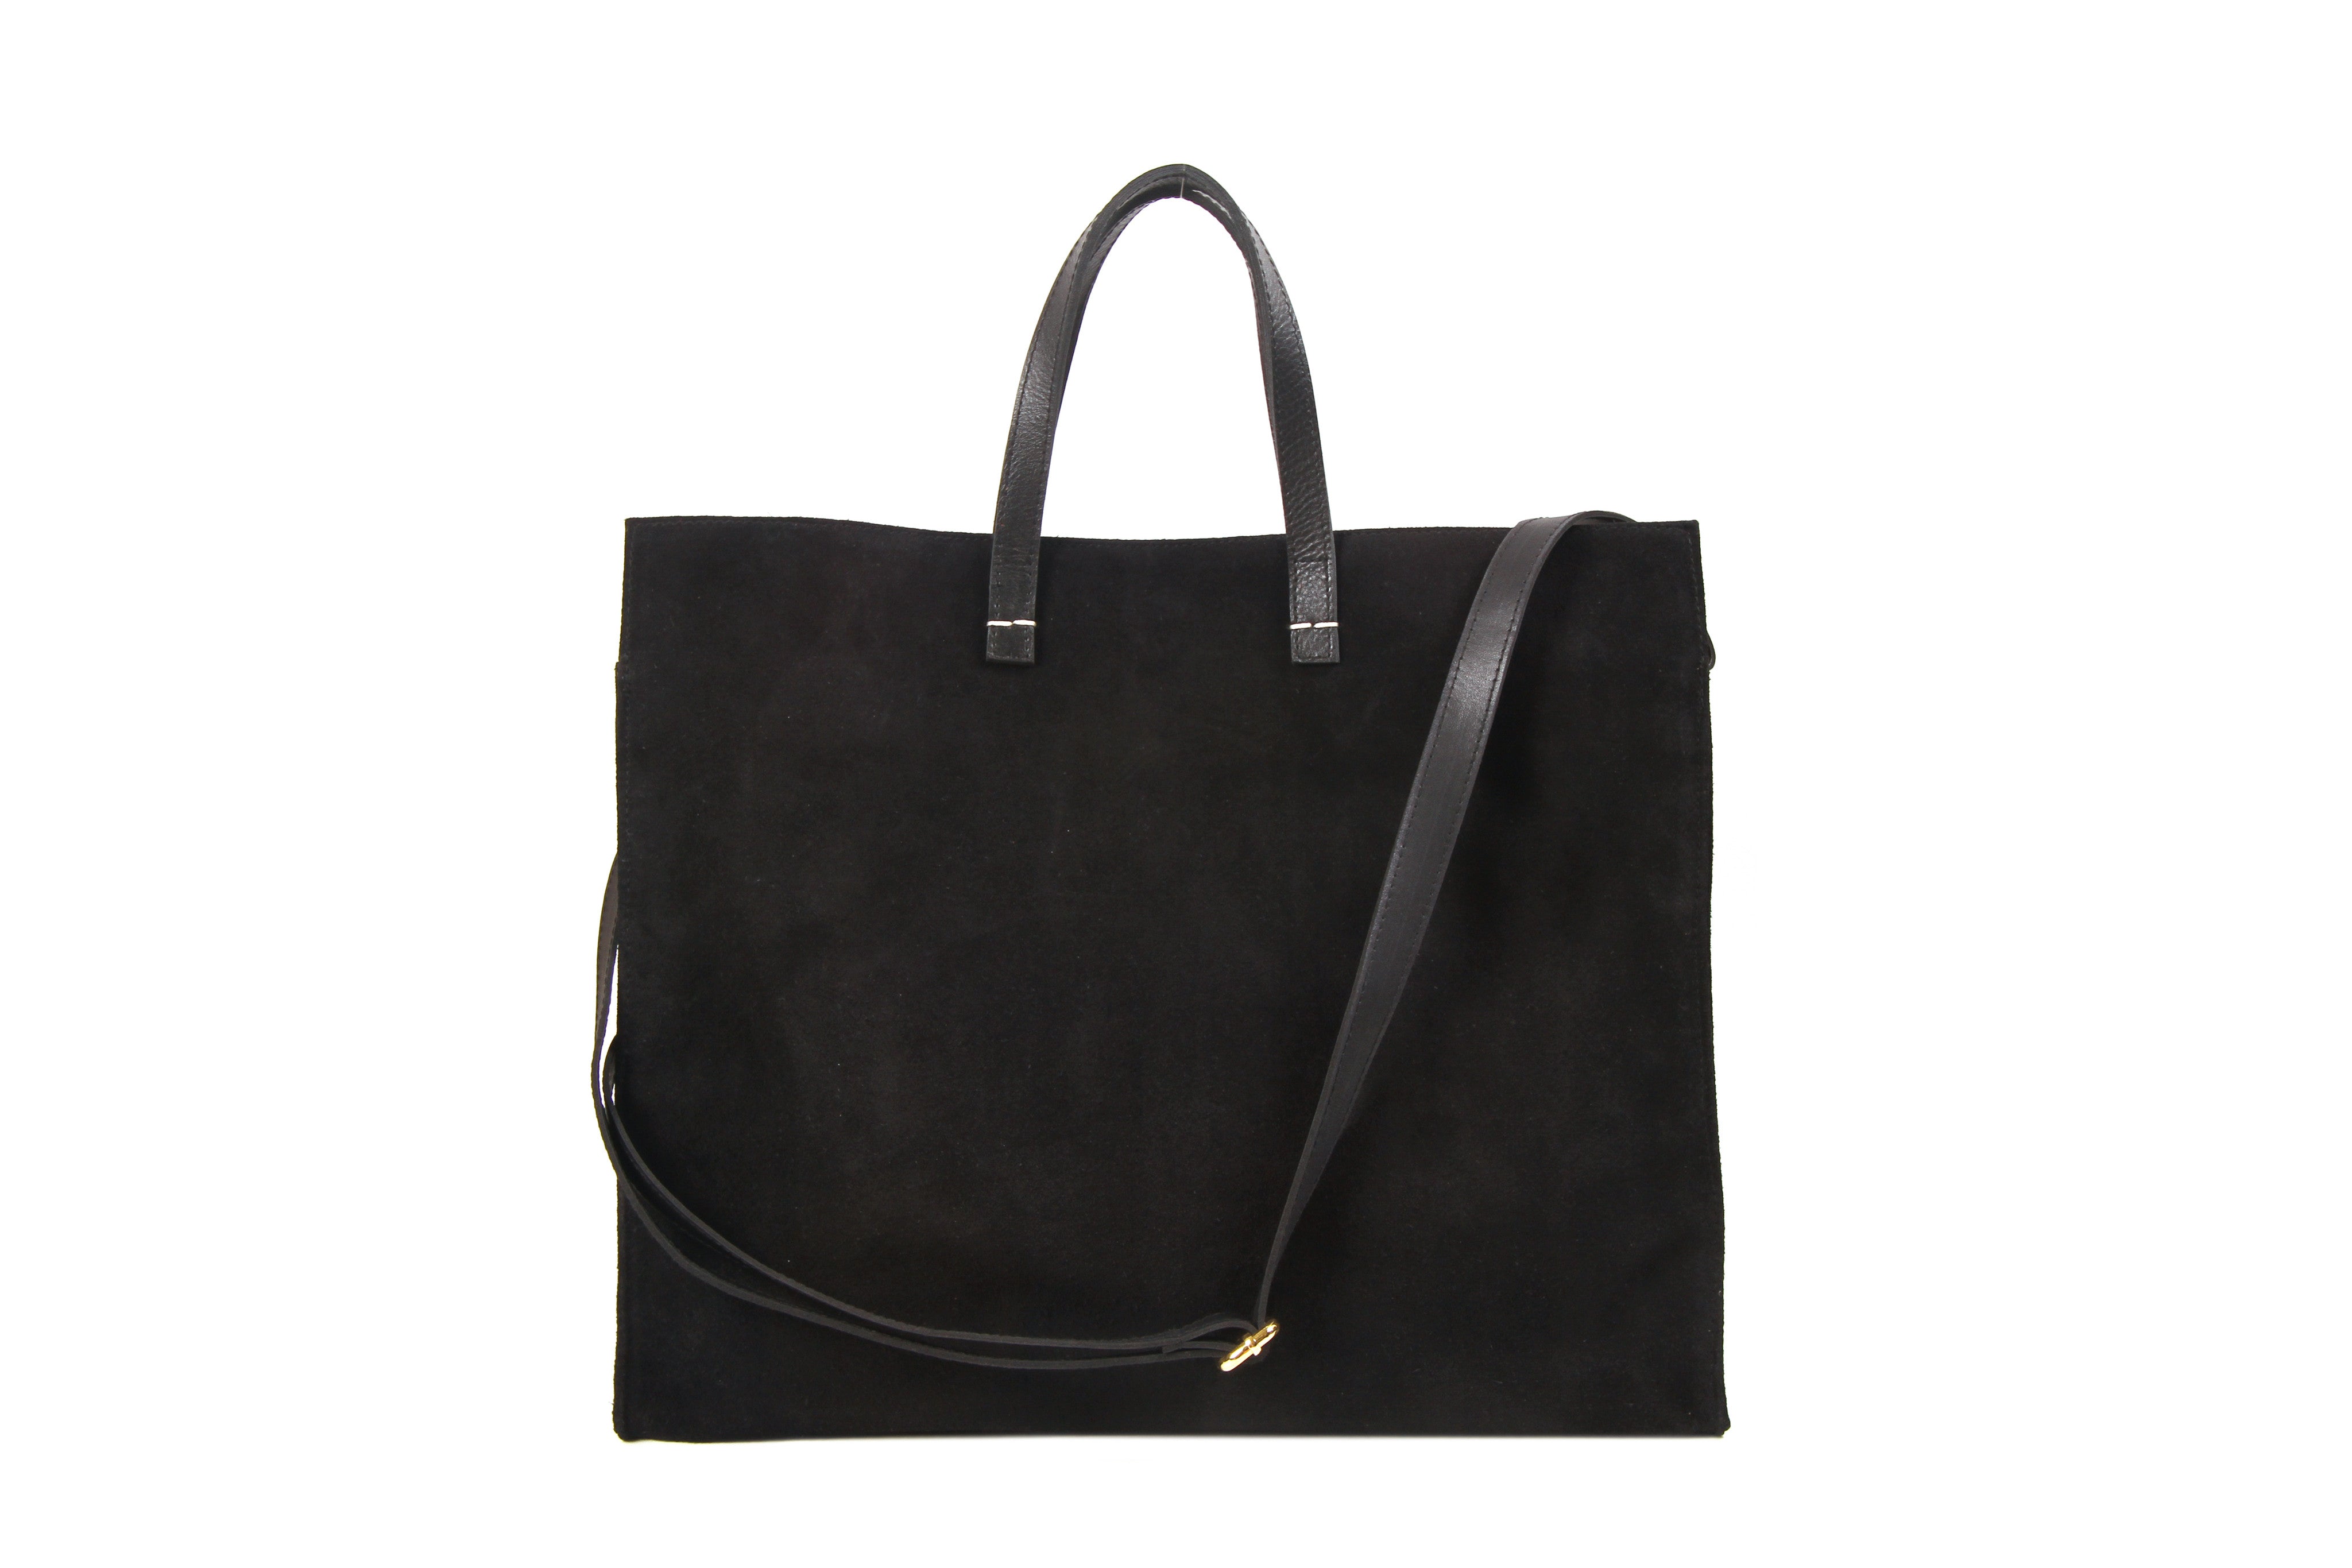 CV. Simple Tote Bag; Clare V. Simple Leather Tote; Tote Bag; Madewell Tote Bag